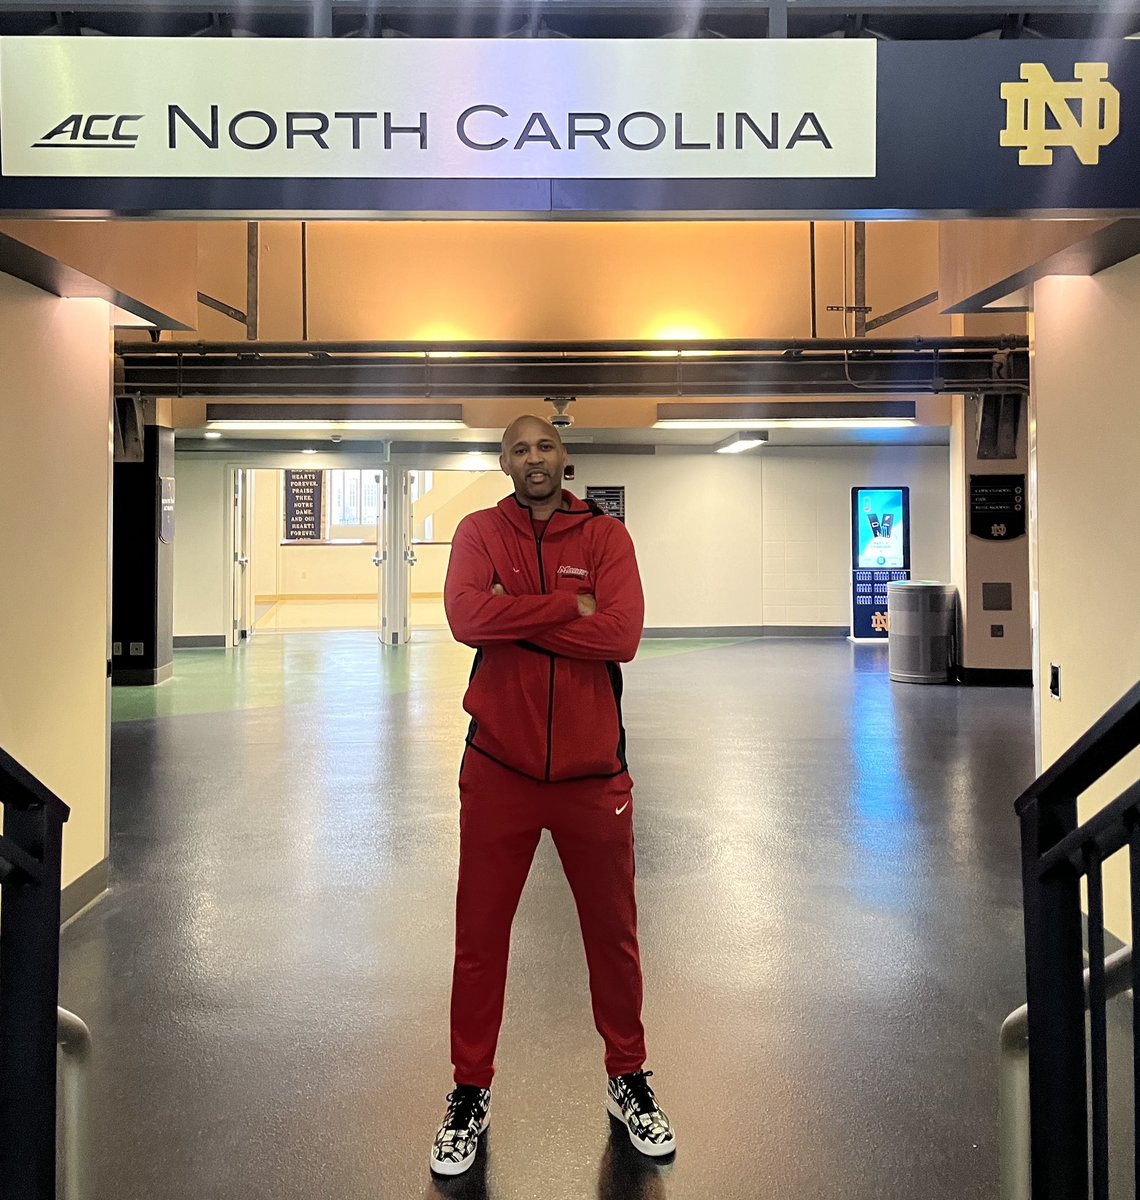 Game Day @NotreDame…couldn’t resist to take a picture under the @UNC_Basketball sign…#goredfoxes